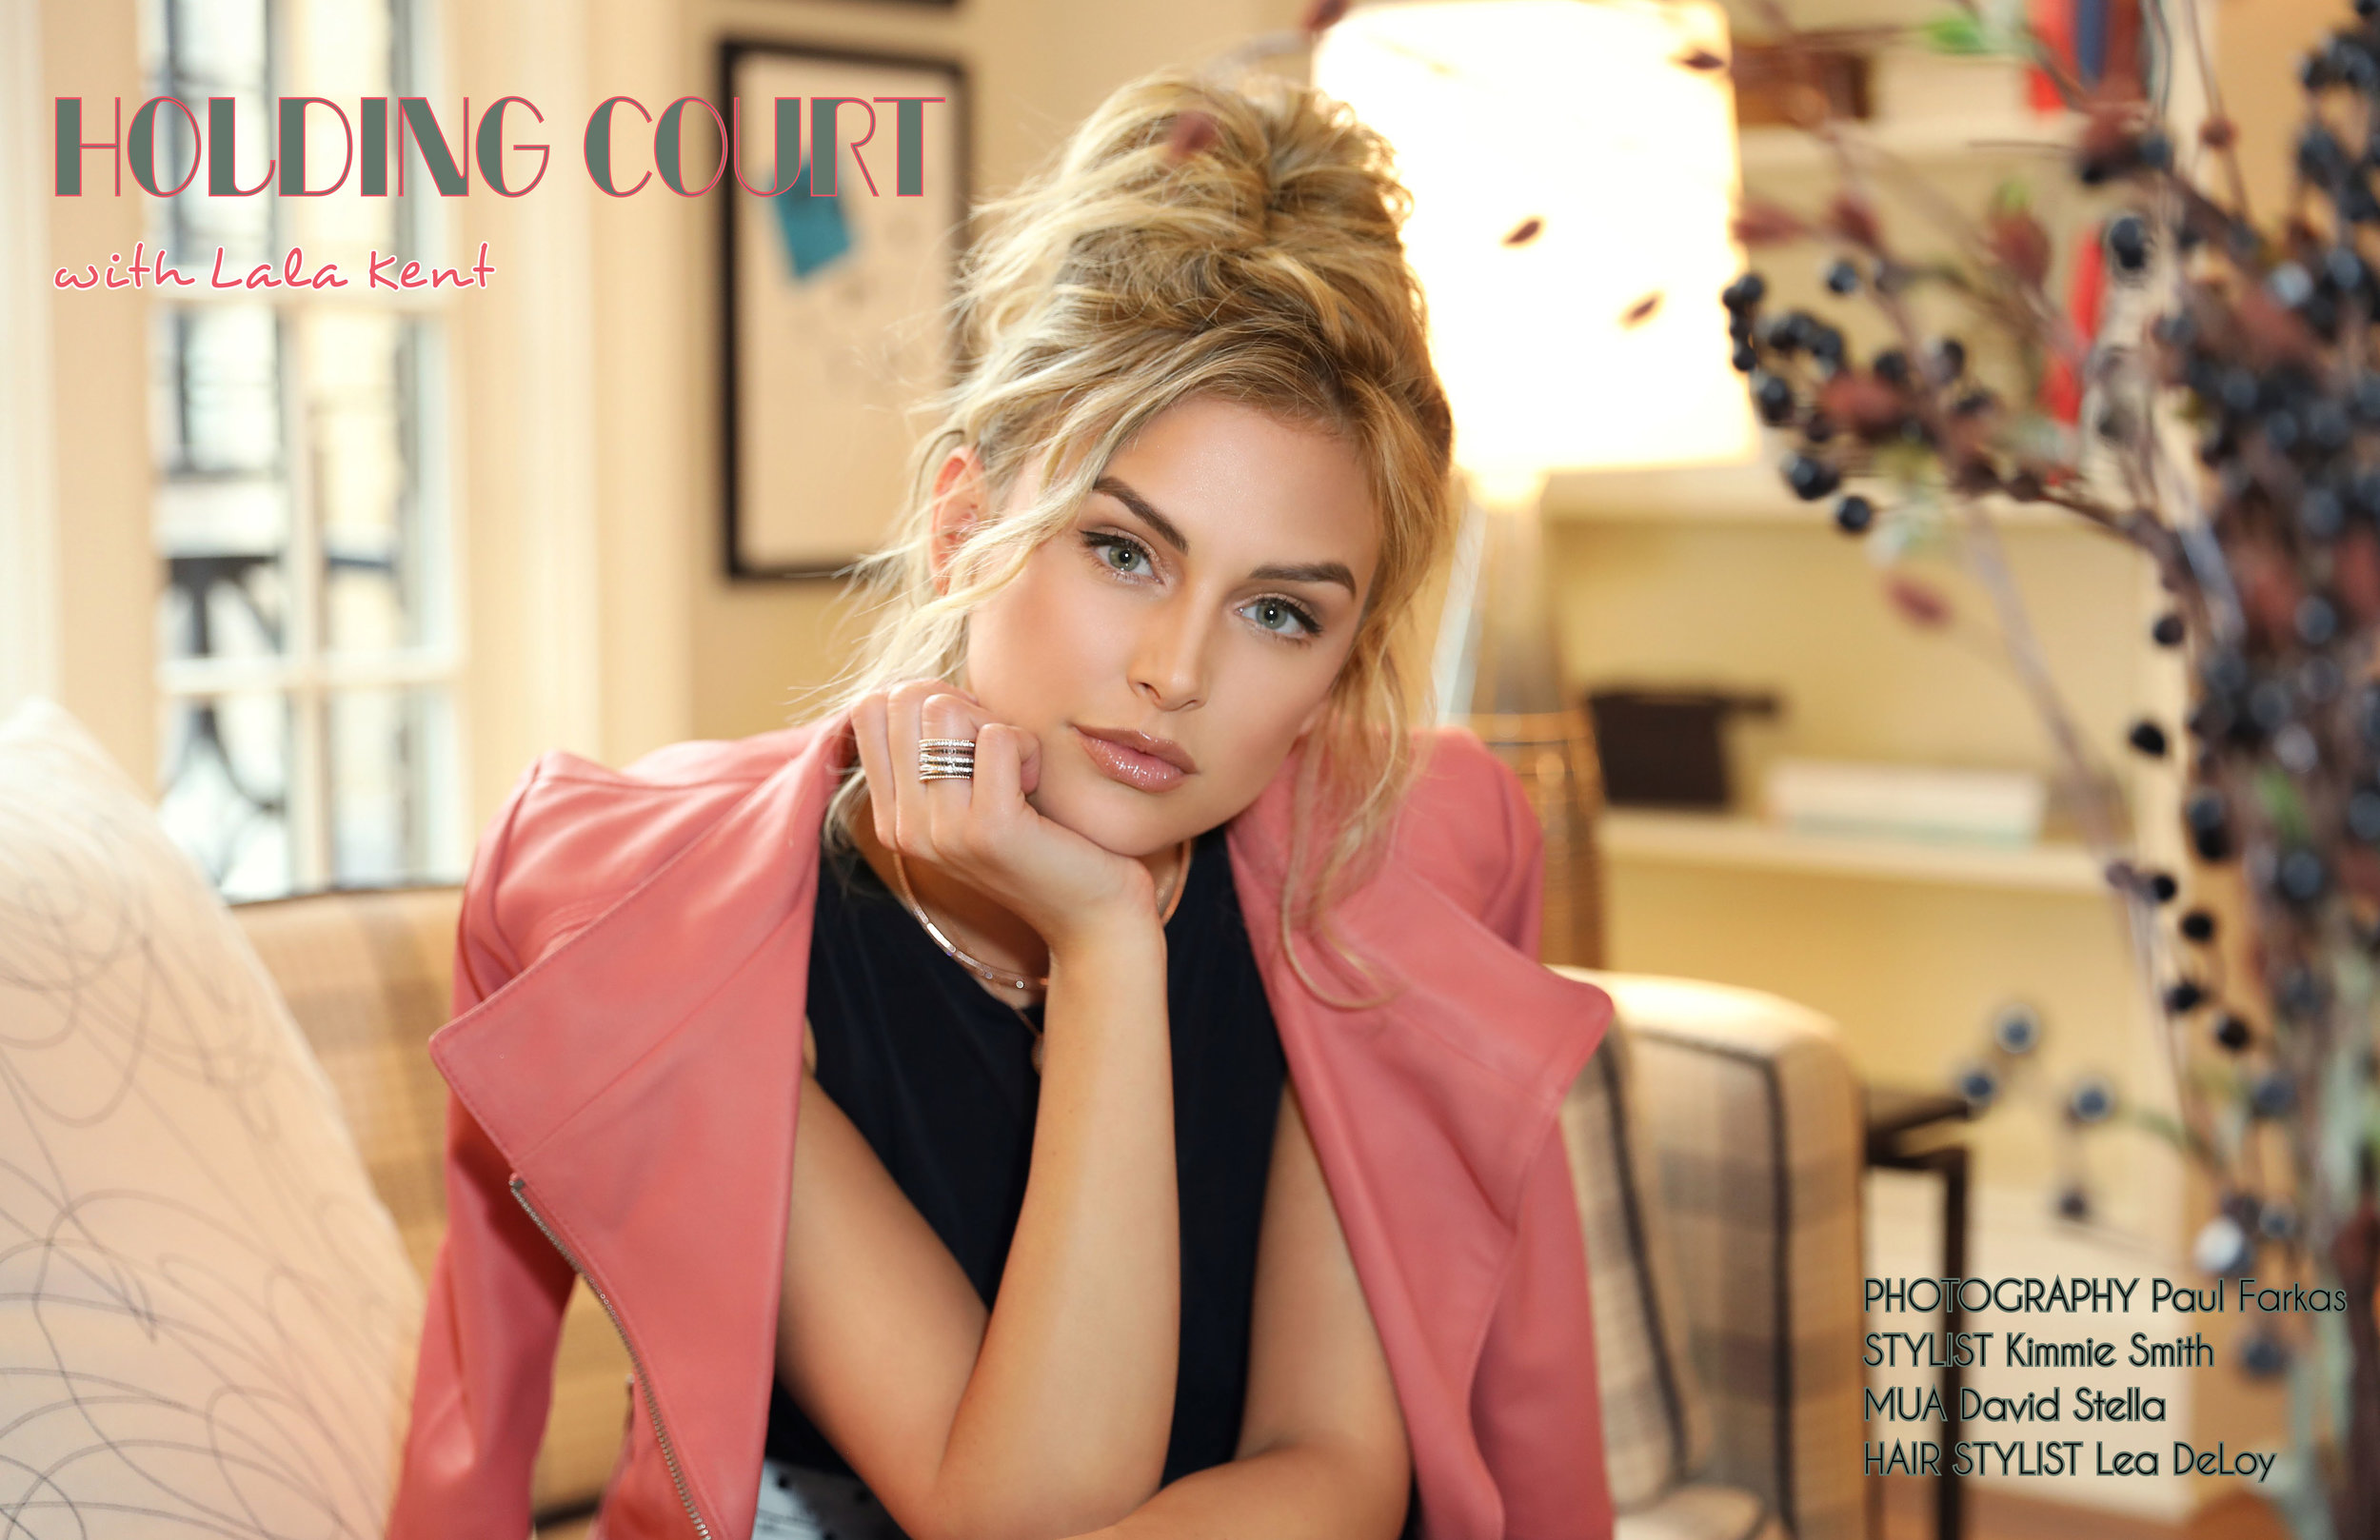 ATHLEISURE MAG MAY ISSUE WITH OUR CELEBRITY COVER, BRAVO'S VANDERPUMP RULES STAR Lala Kent